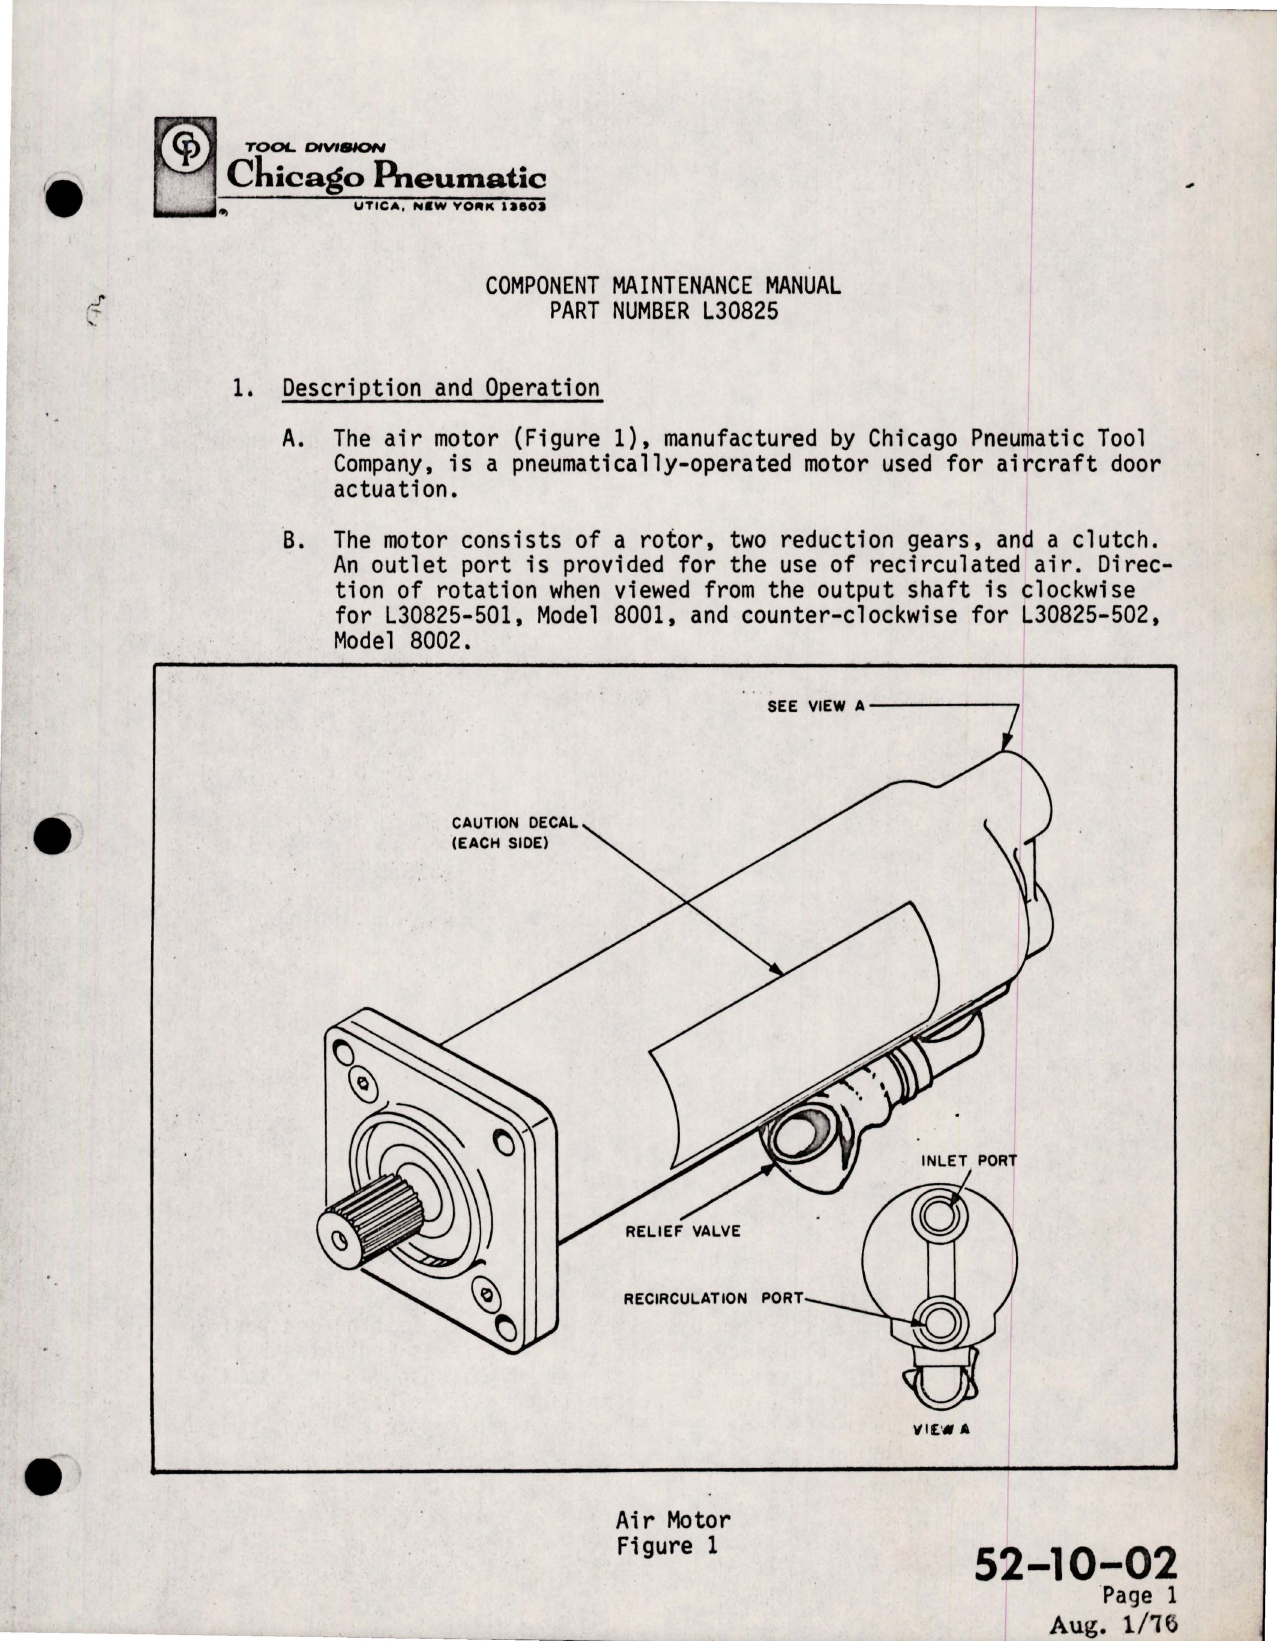 Sample page 7 from AirCorps Library document: Maintenance Manual for Air Motor - Part L30825-501 and L30825-502